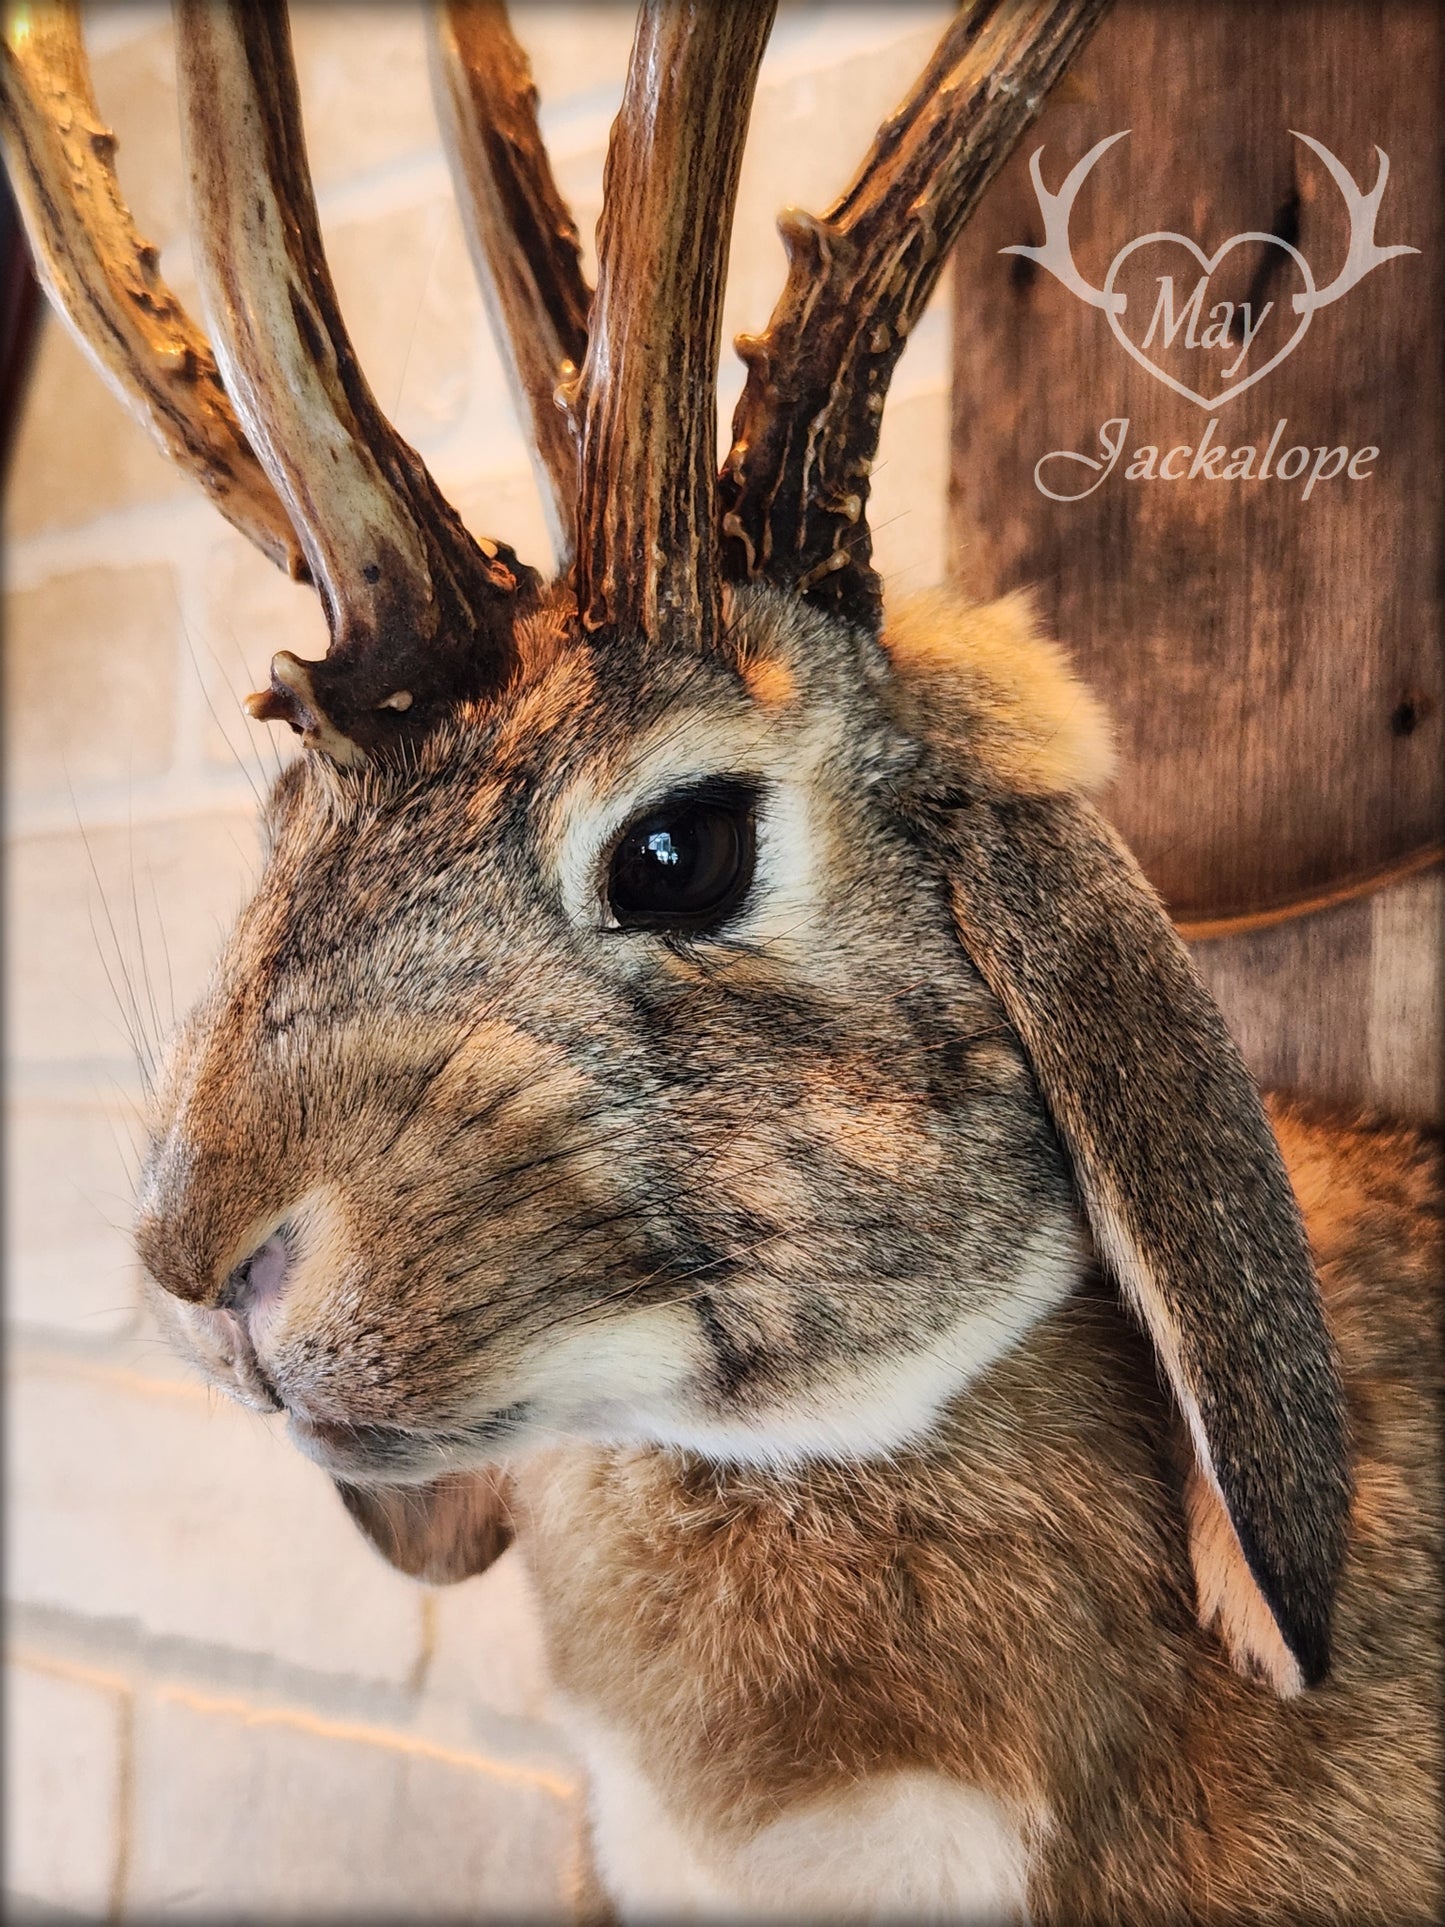 Brown Jackalope taxidermy with dark eyes, white heart on the belly & real atypical antlers.